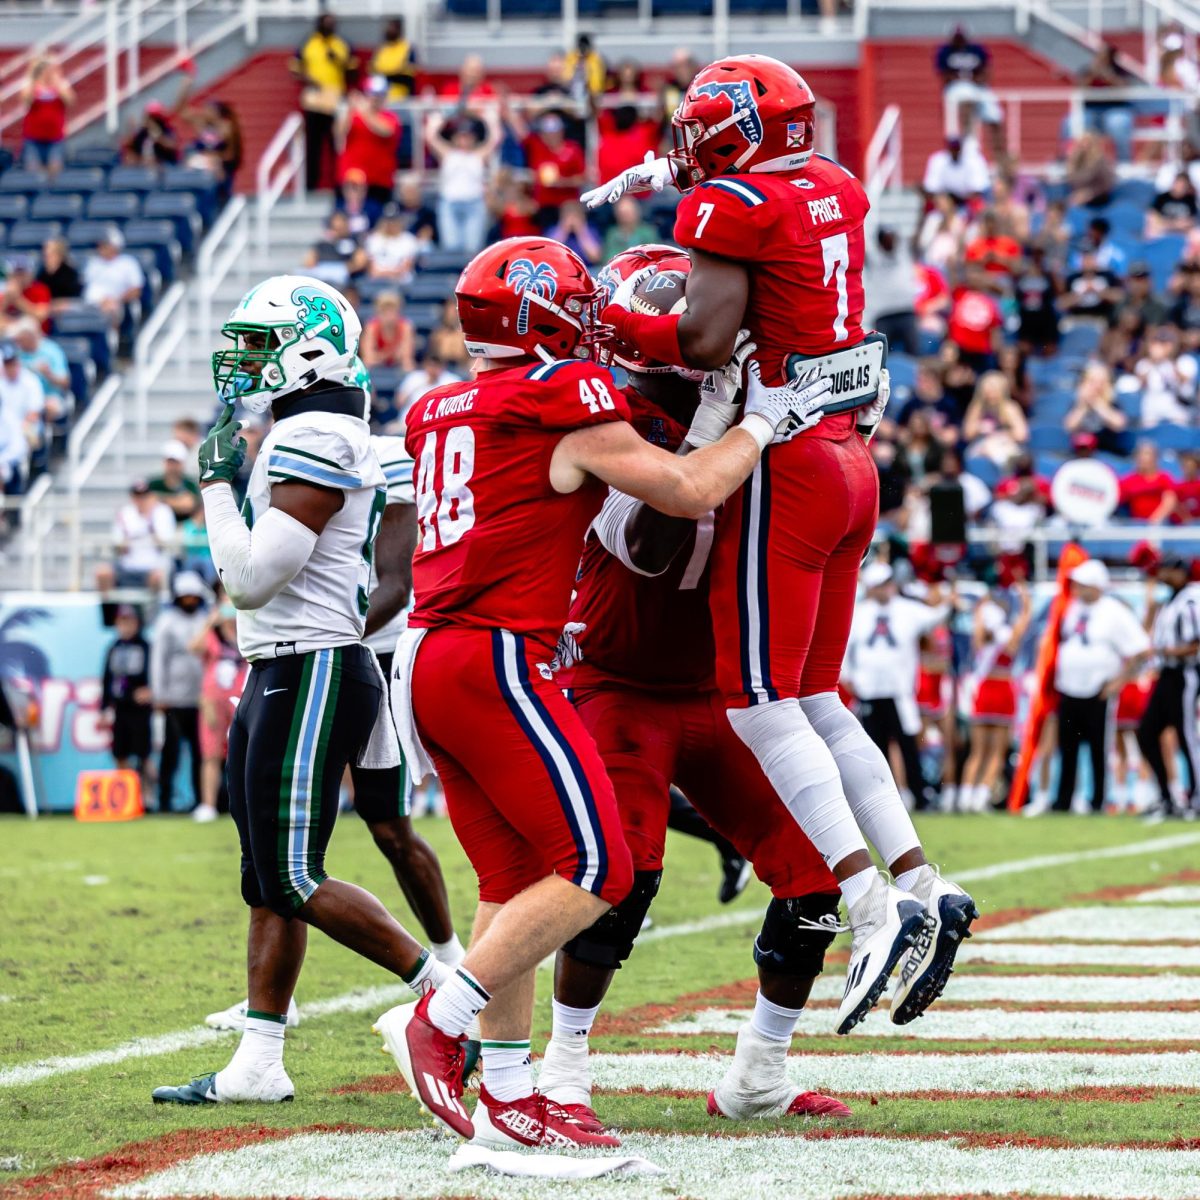 FAU+freshman+tight+end+Zeke+Moore+%28%2348%29+and+another+player+celebrating+with+junior+wide+receiver+Devin+Price+%28%237%29+after+Price+caught+a+pass+by+junior+quarterback+Daniel+Richardson+for+a+two-point+conversion+in+the+fourth+quarter.+FAU+lost+their+final+home+game+of+the+season+to+No.+17+Tulane%2C+24-8%2C+on+Saturday%2C+Nov.+18%2C+2023.